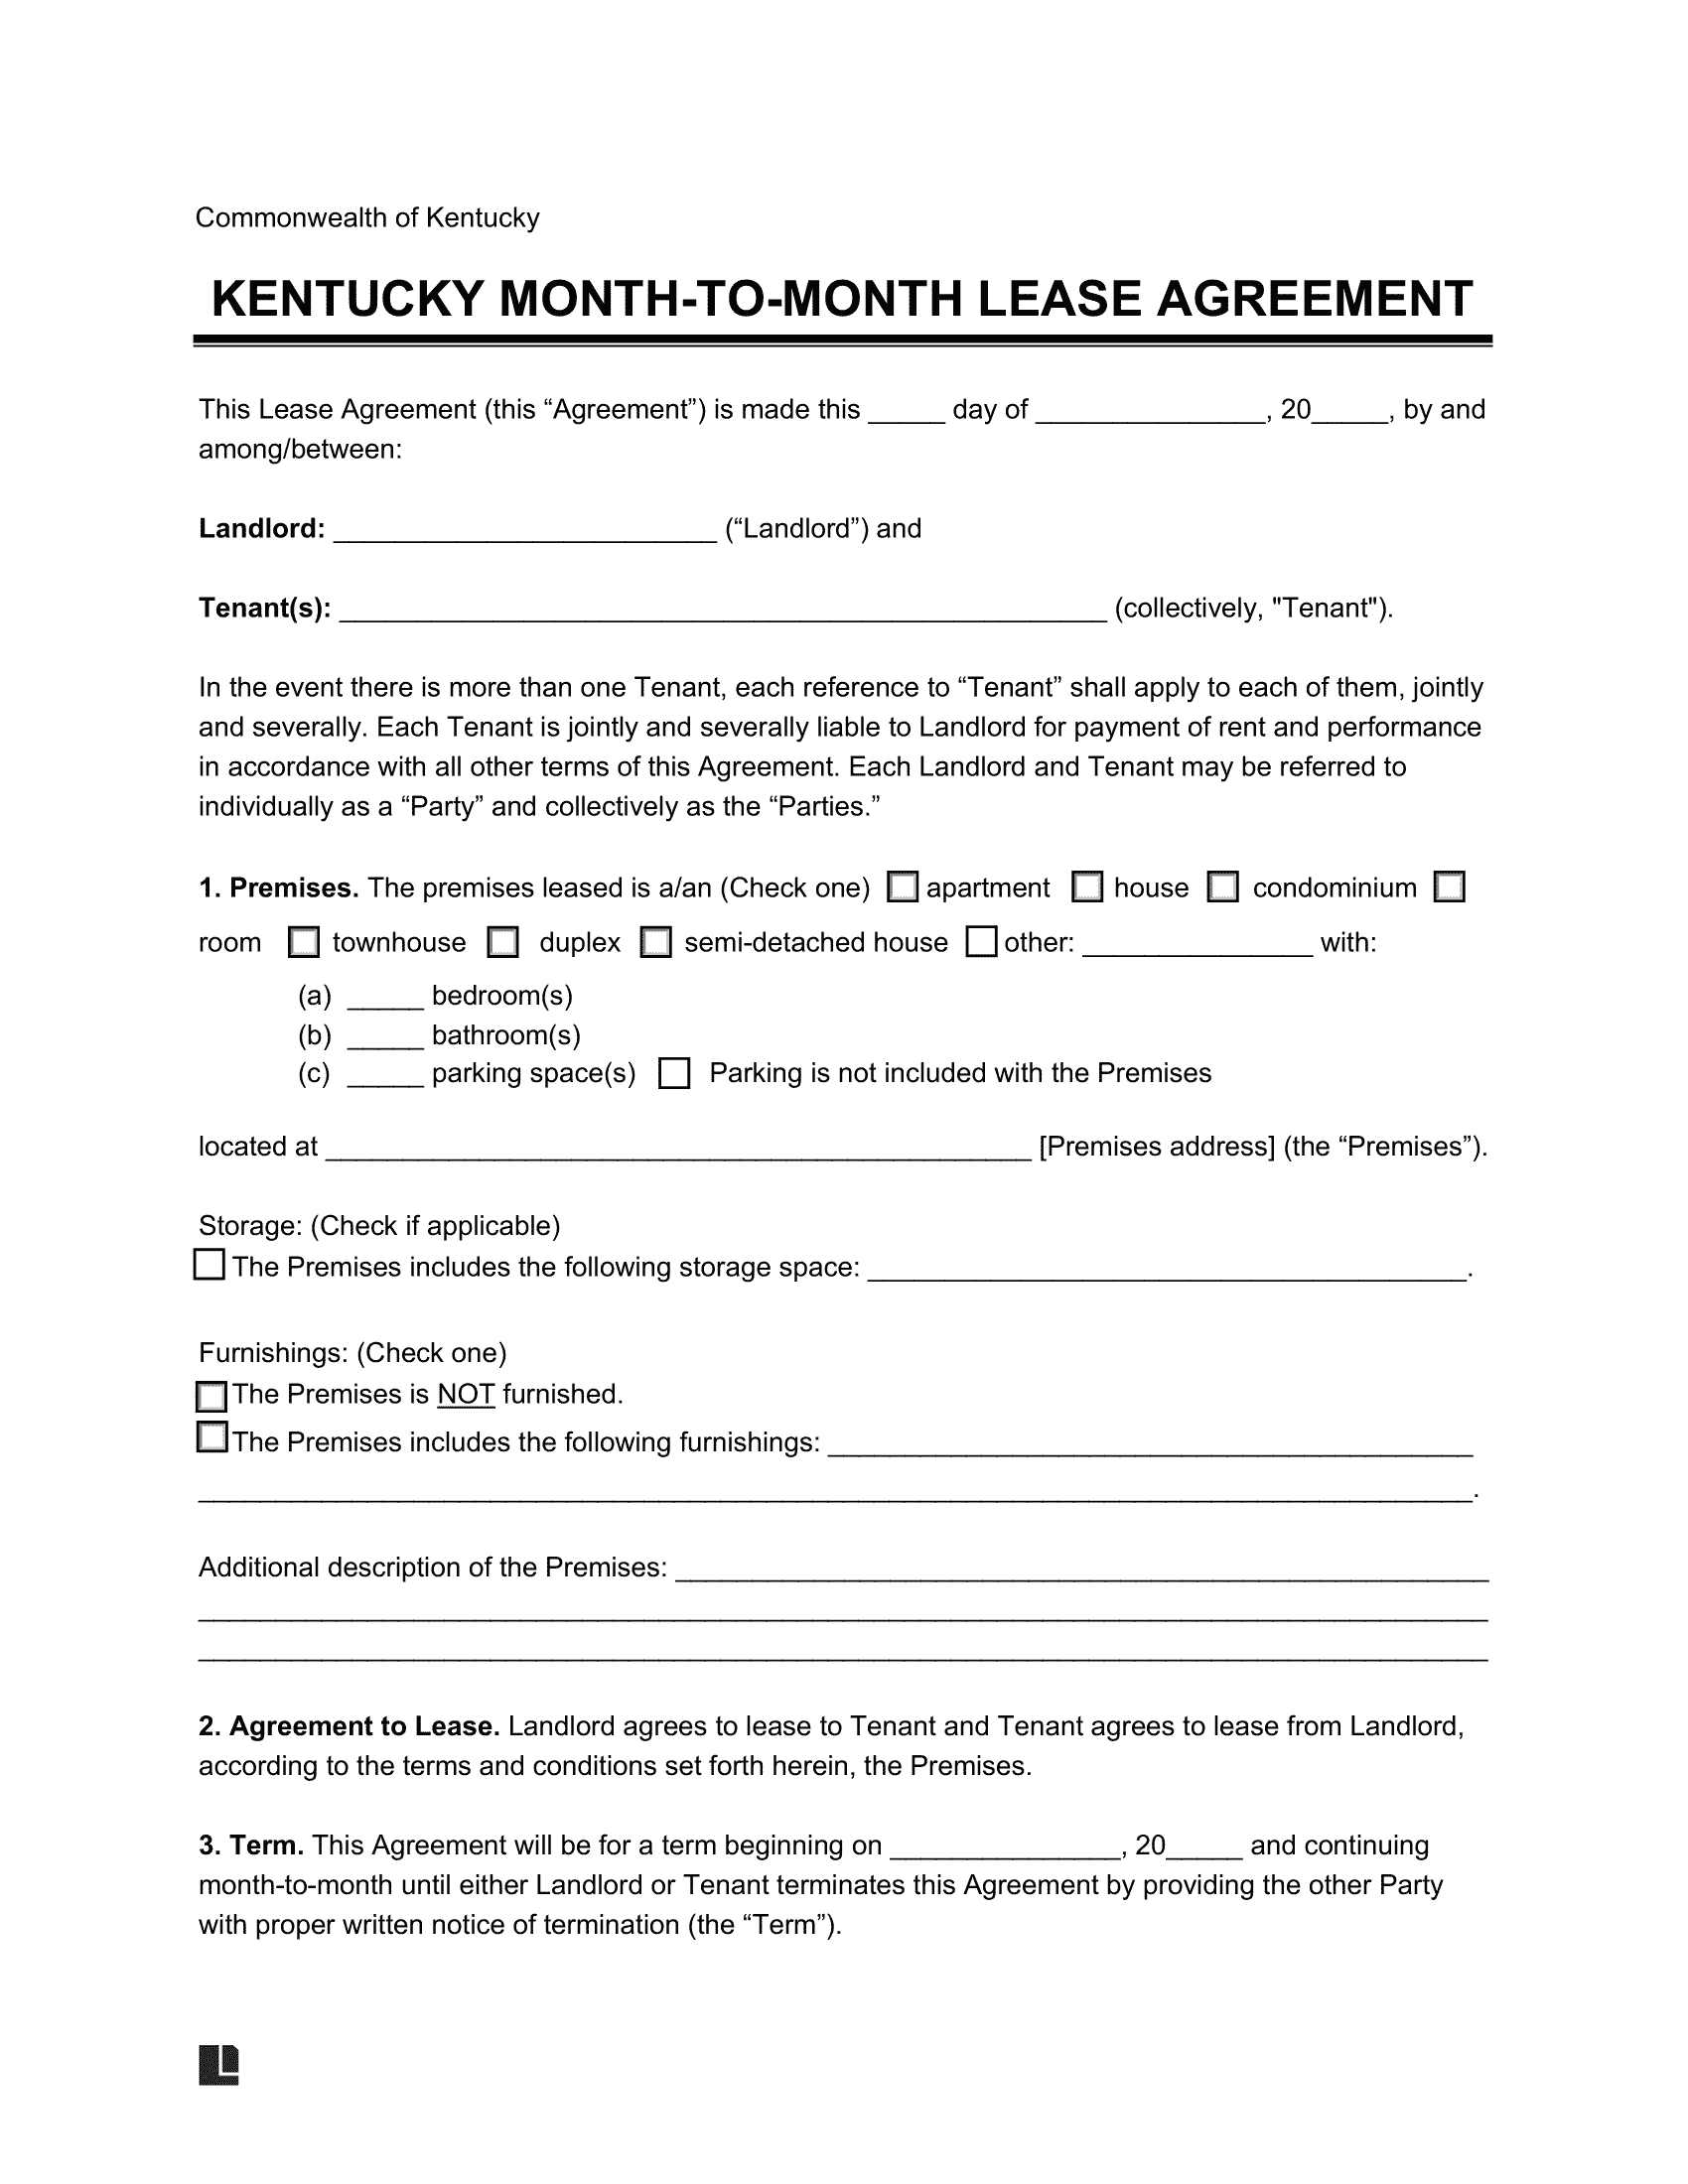 Kentucky Month-to-Month Rental Agreement